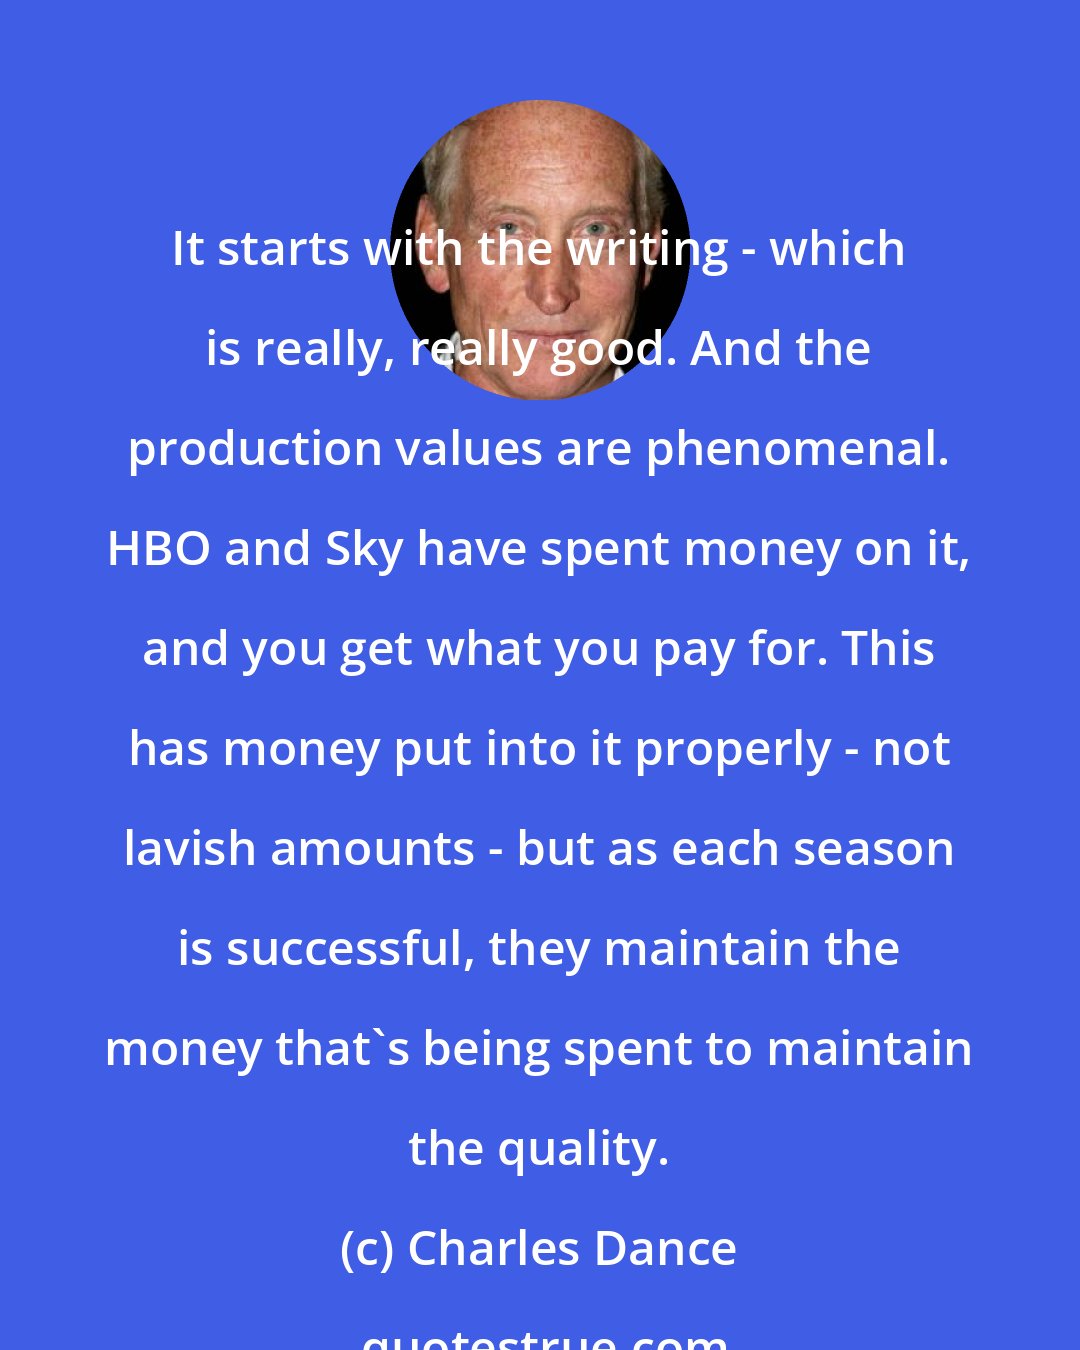 Charles Dance: It starts with the writing - which is really, really good. And the production values are phenomenal. HBO and Sky have spent money on it, and you get what you pay for. This has money put into it properly - not lavish amounts - but as each season is successful, they maintain the money that's being spent to maintain the quality.